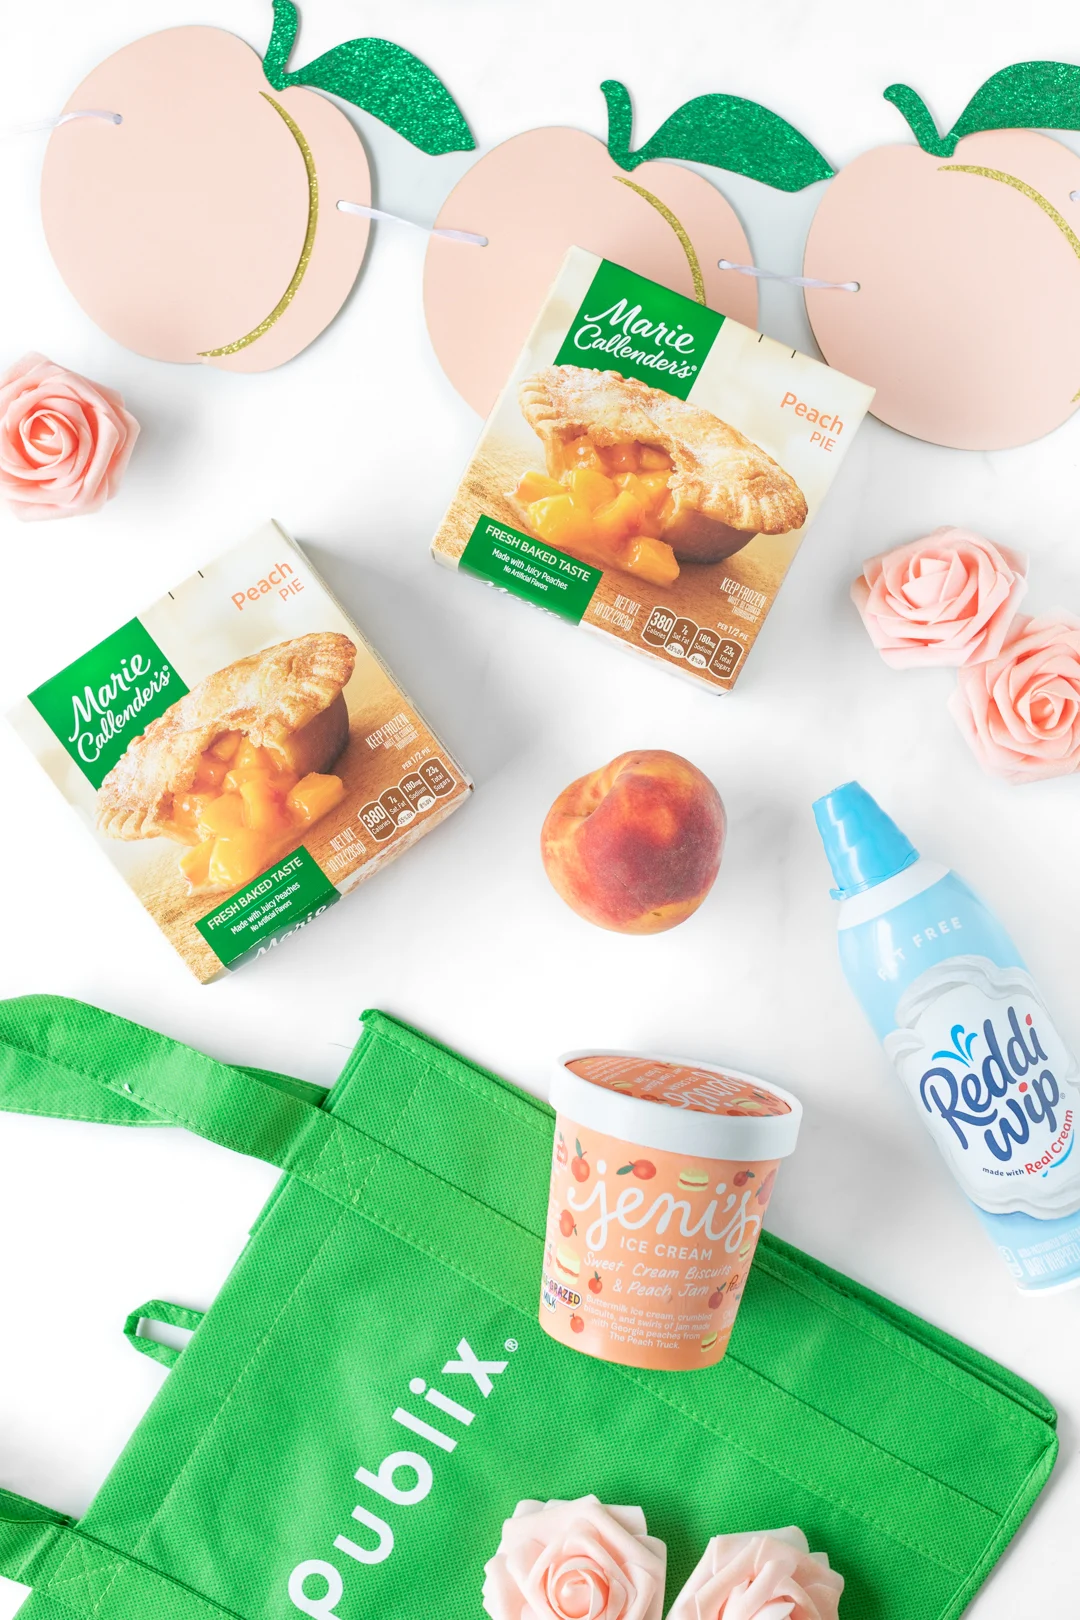 publix shopping bag with groceries including Jeni's ice cream, marie callendar's peach pies and Reddi-whip.